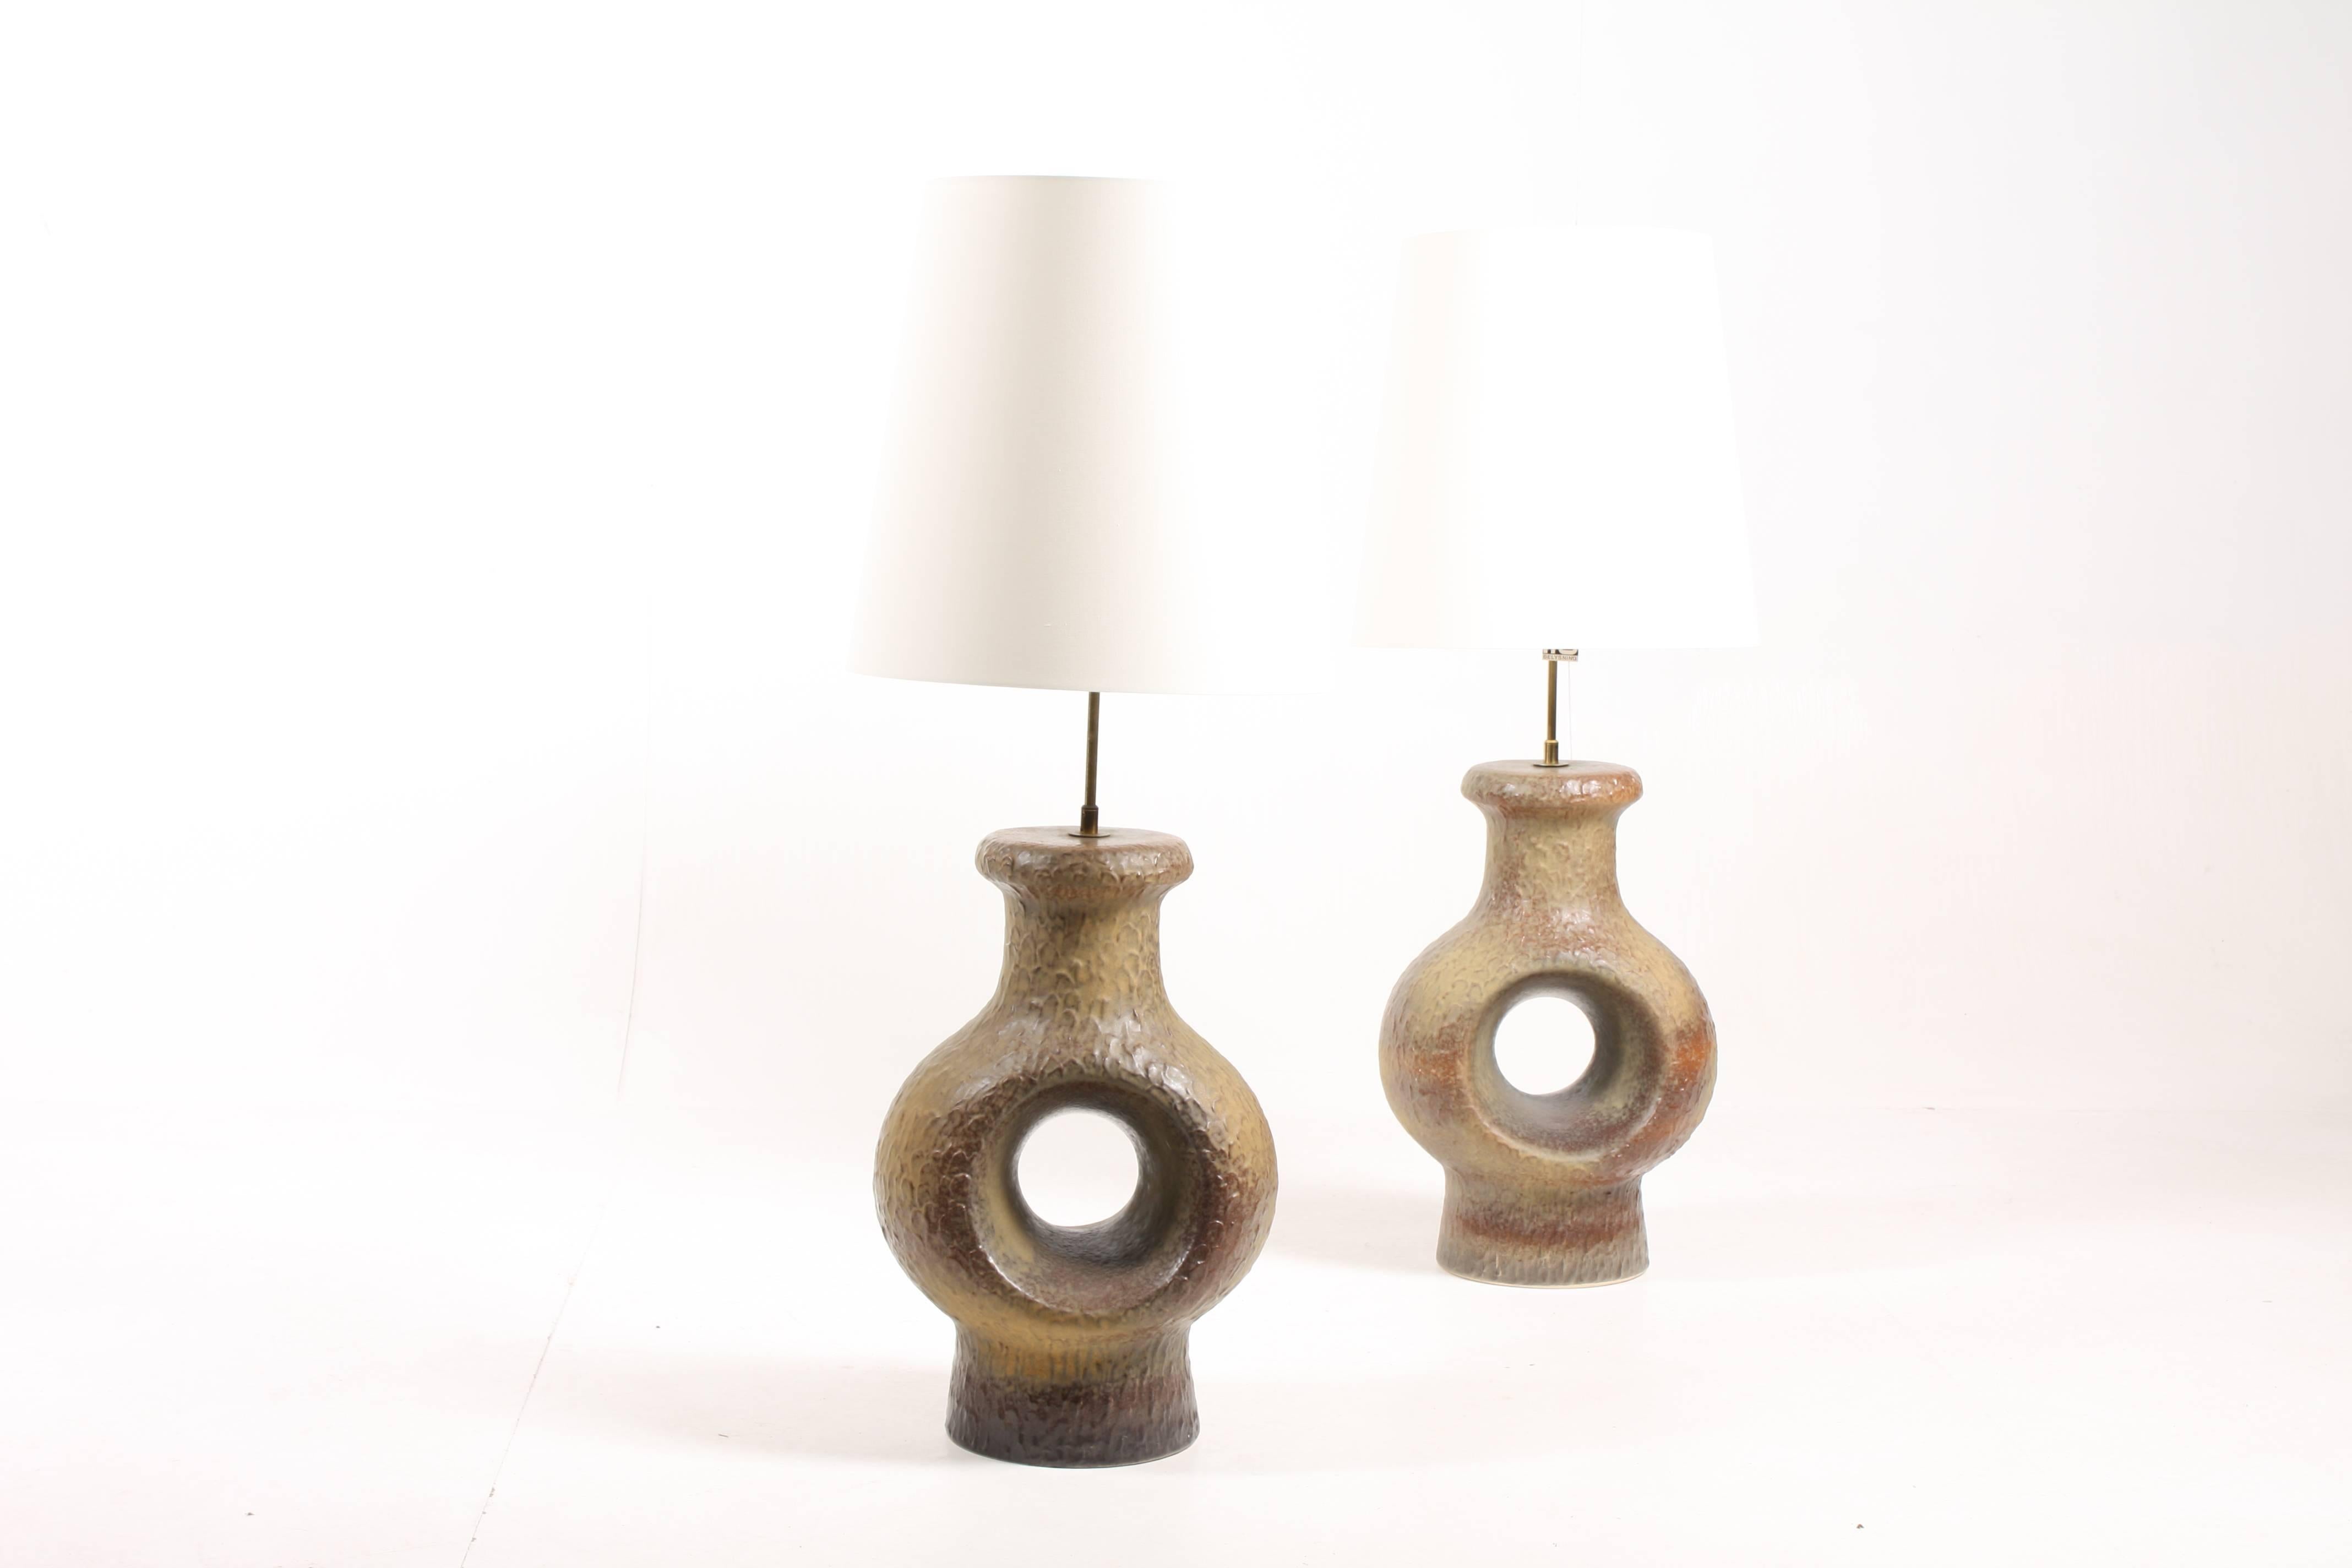 Pair of artefact table lamps handmade and designed in Denmark in late 1960s. Very minimalistic brass detailing combined with the ceramic Stand.
Comes with new lampshades.